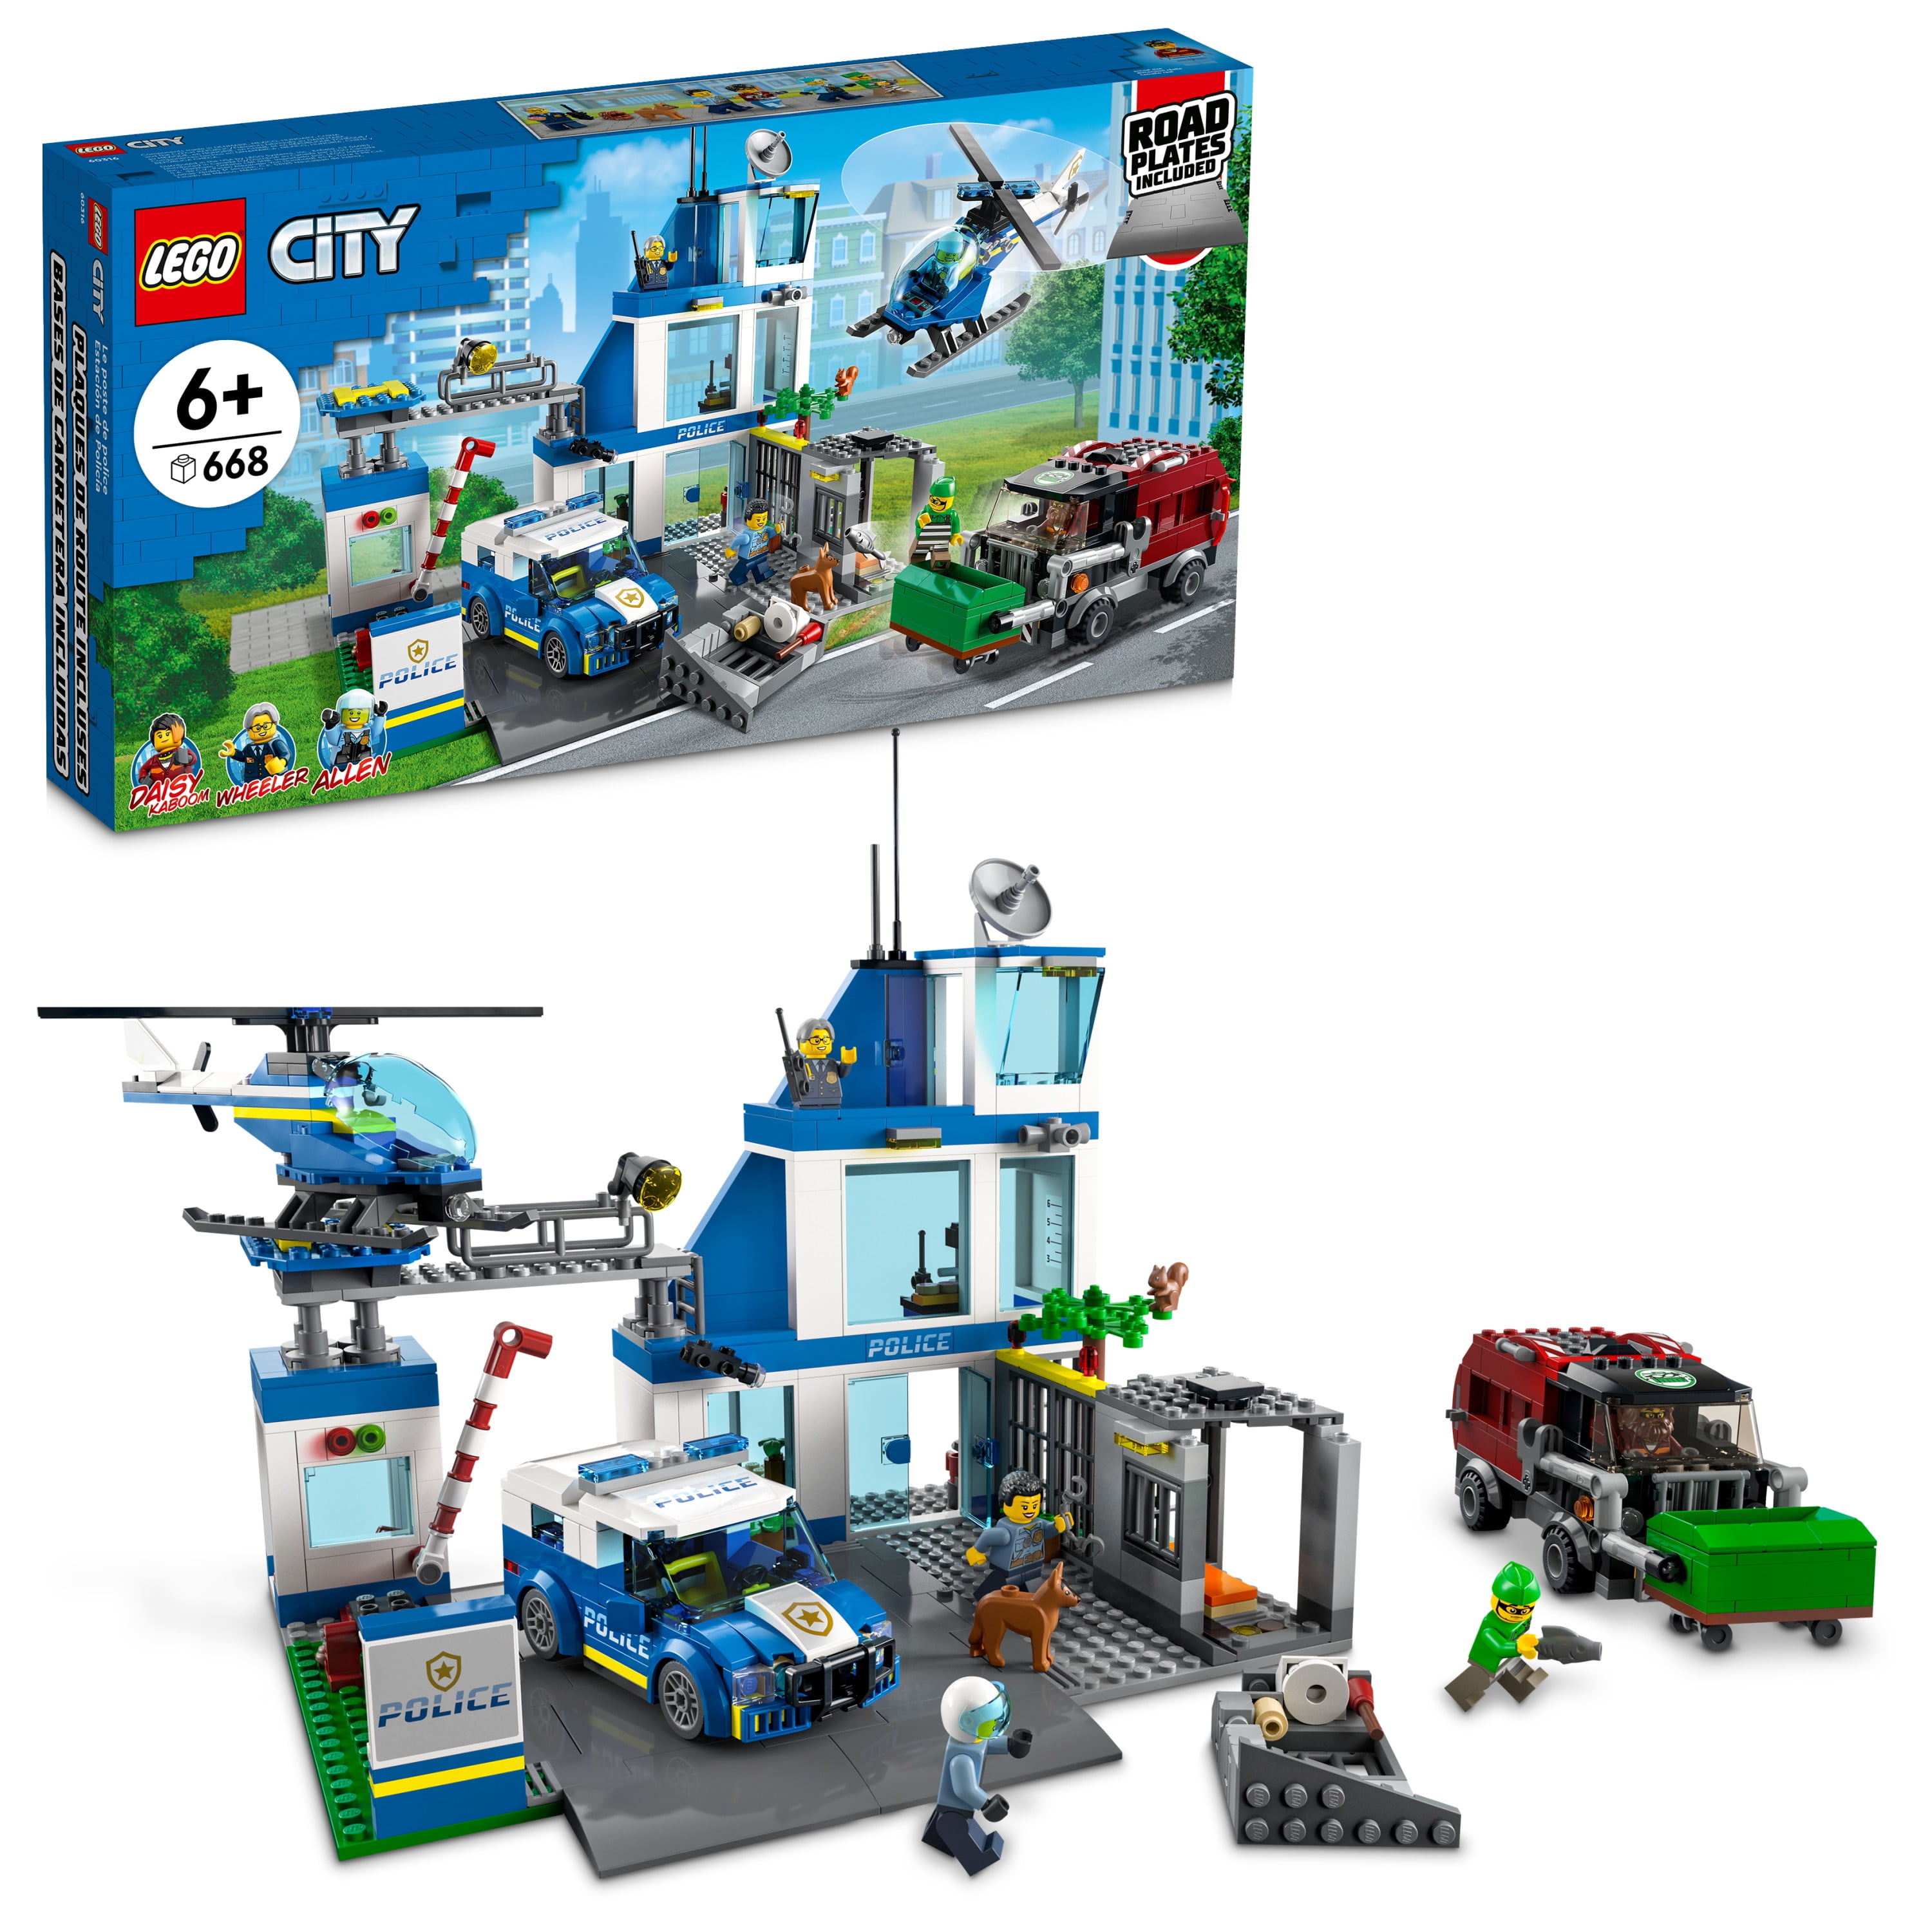 Hæderlig Metal linje pubertet LEGO City Police Station with Van, Garbage Truck & Helicopter Toy 60316,  Gifts for 6 Plus Year Old Kids, Boys & Girls with 5 Minifigures and Dog Toy  - Walmart.com